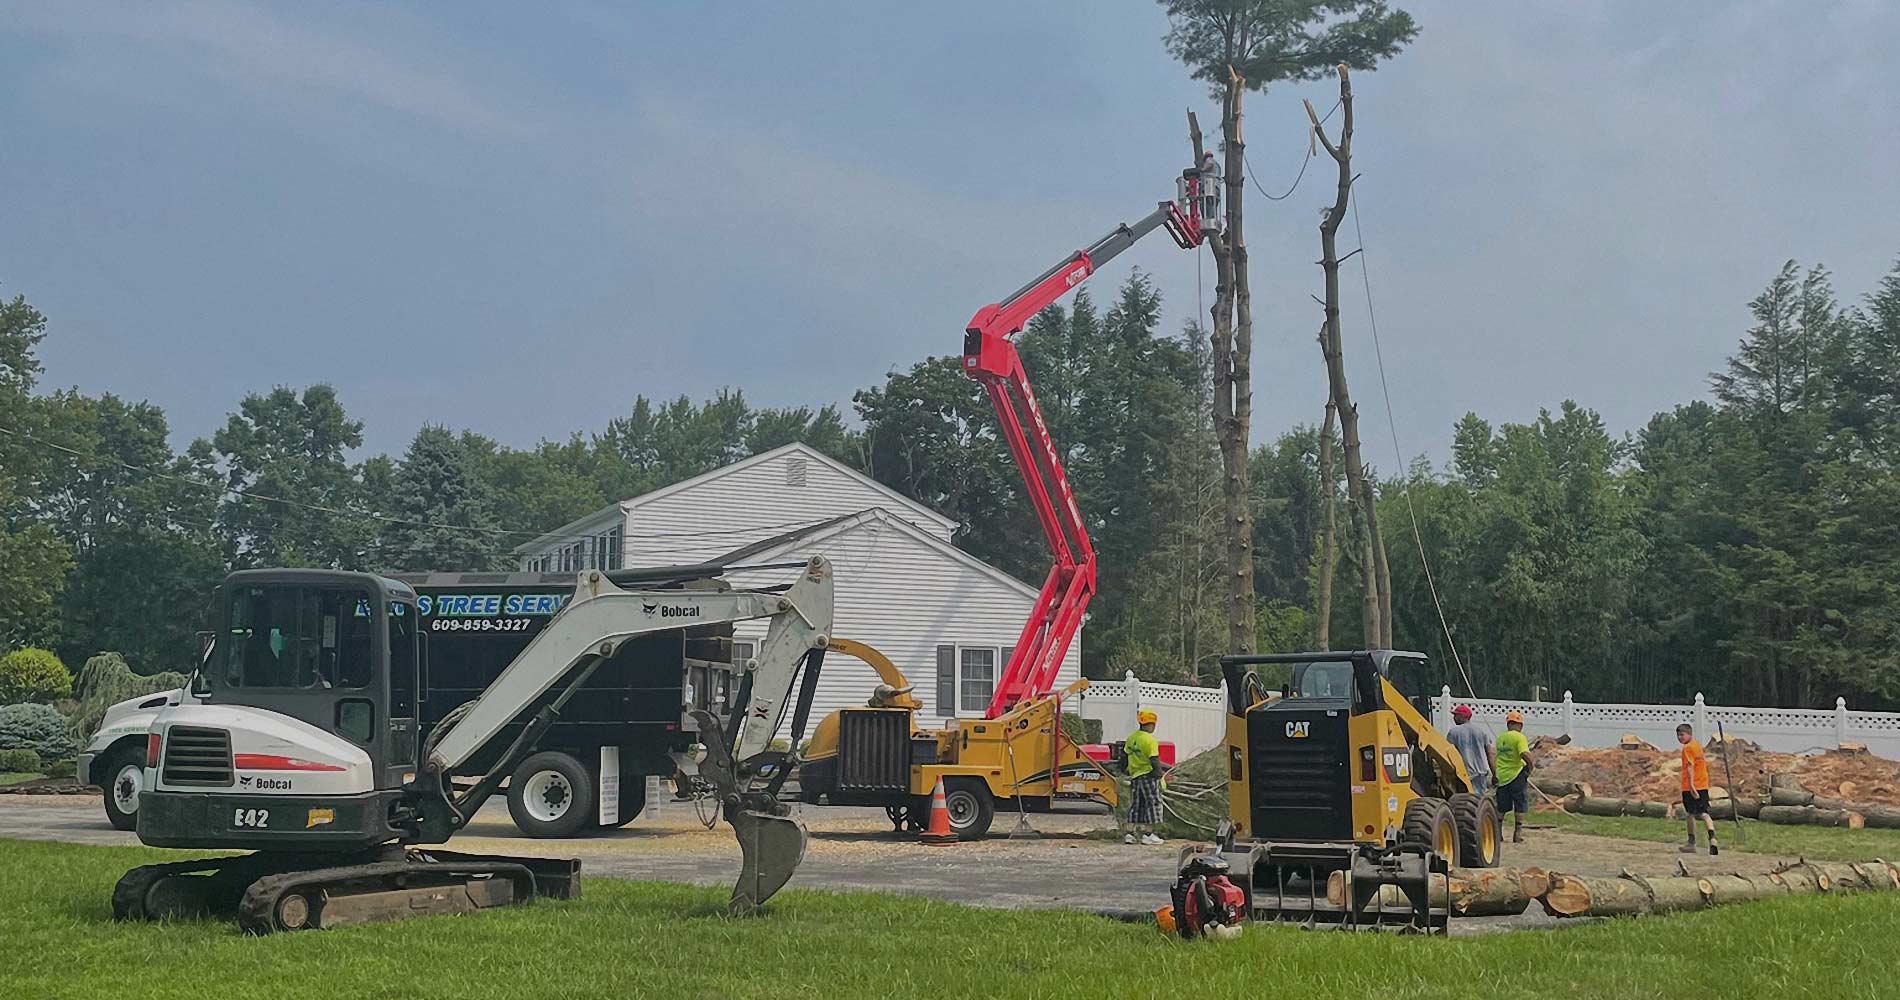 Landscaping Tree Removal South Jersey | Lewis Lawn & Tree Service